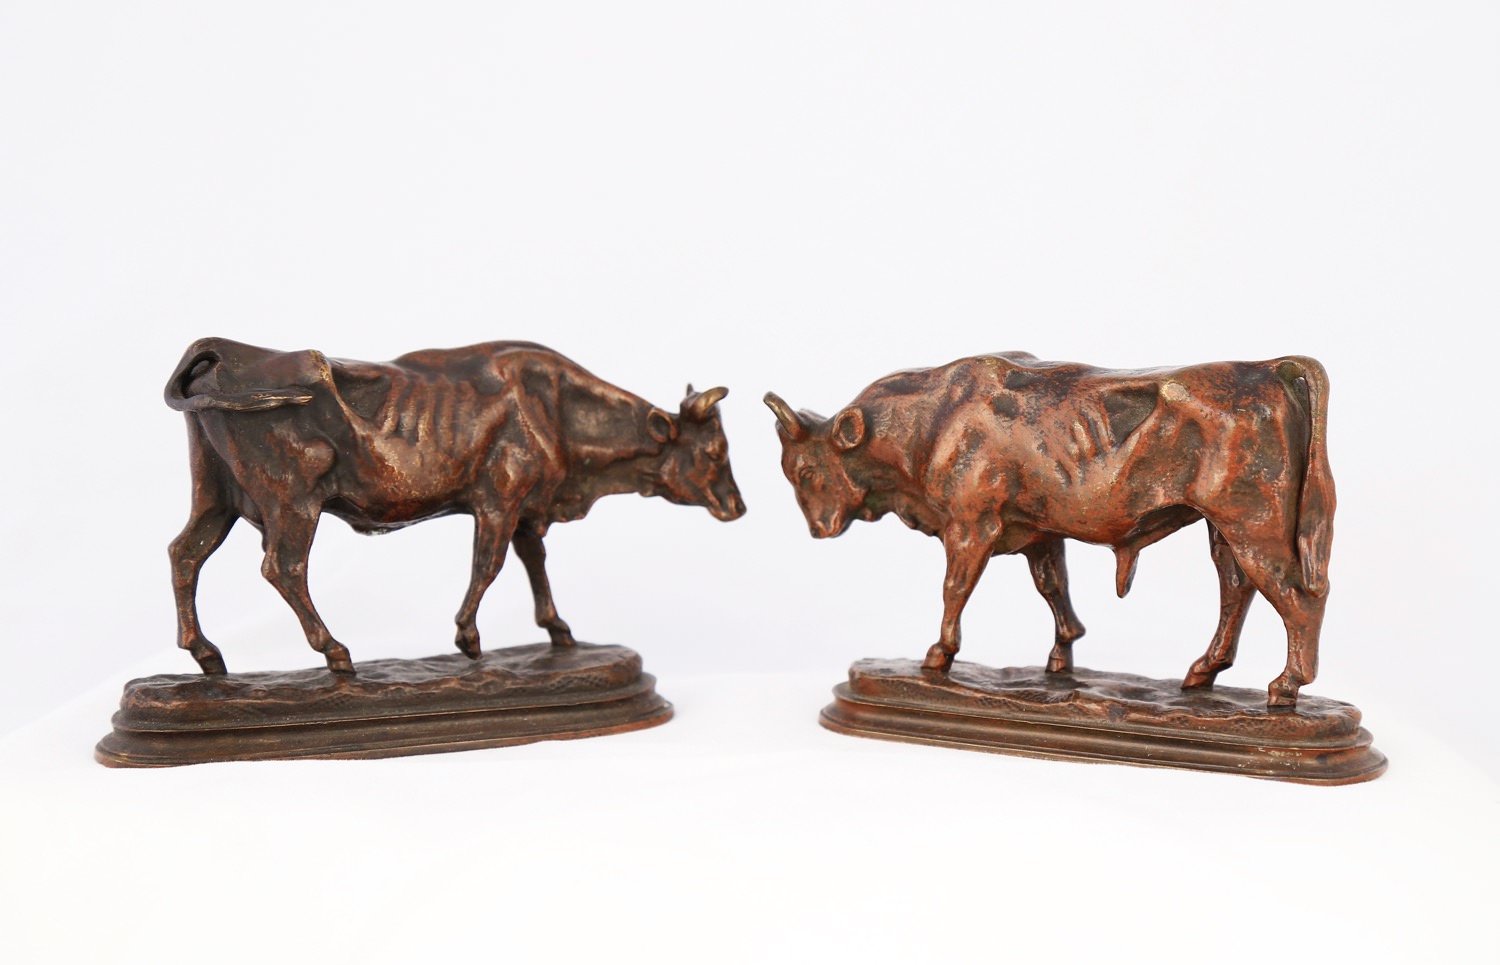 Pair of Bronze Sculptures, Bull and Cow by Auguste Caïn